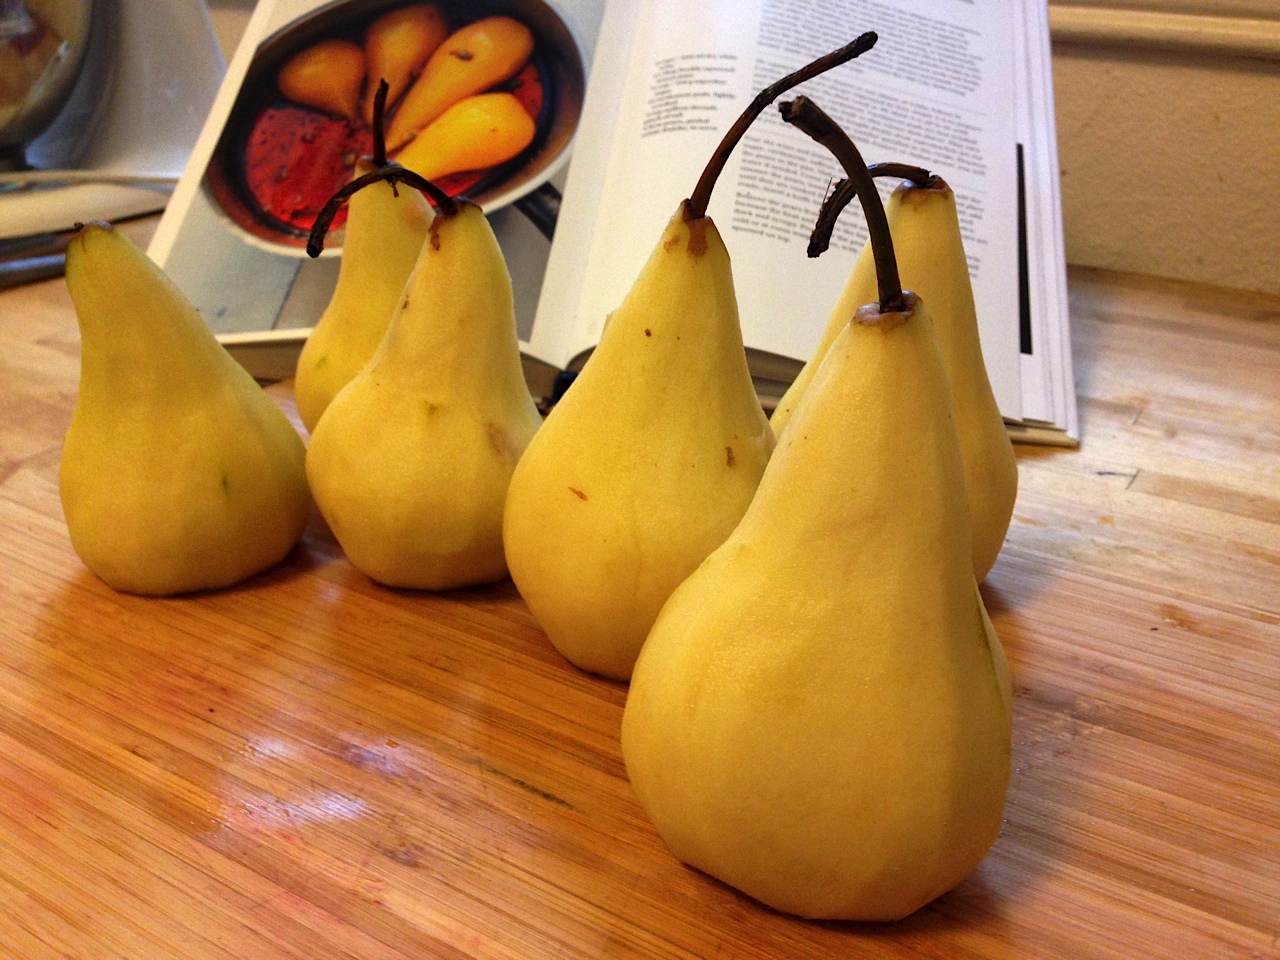 peeled pears for poaching